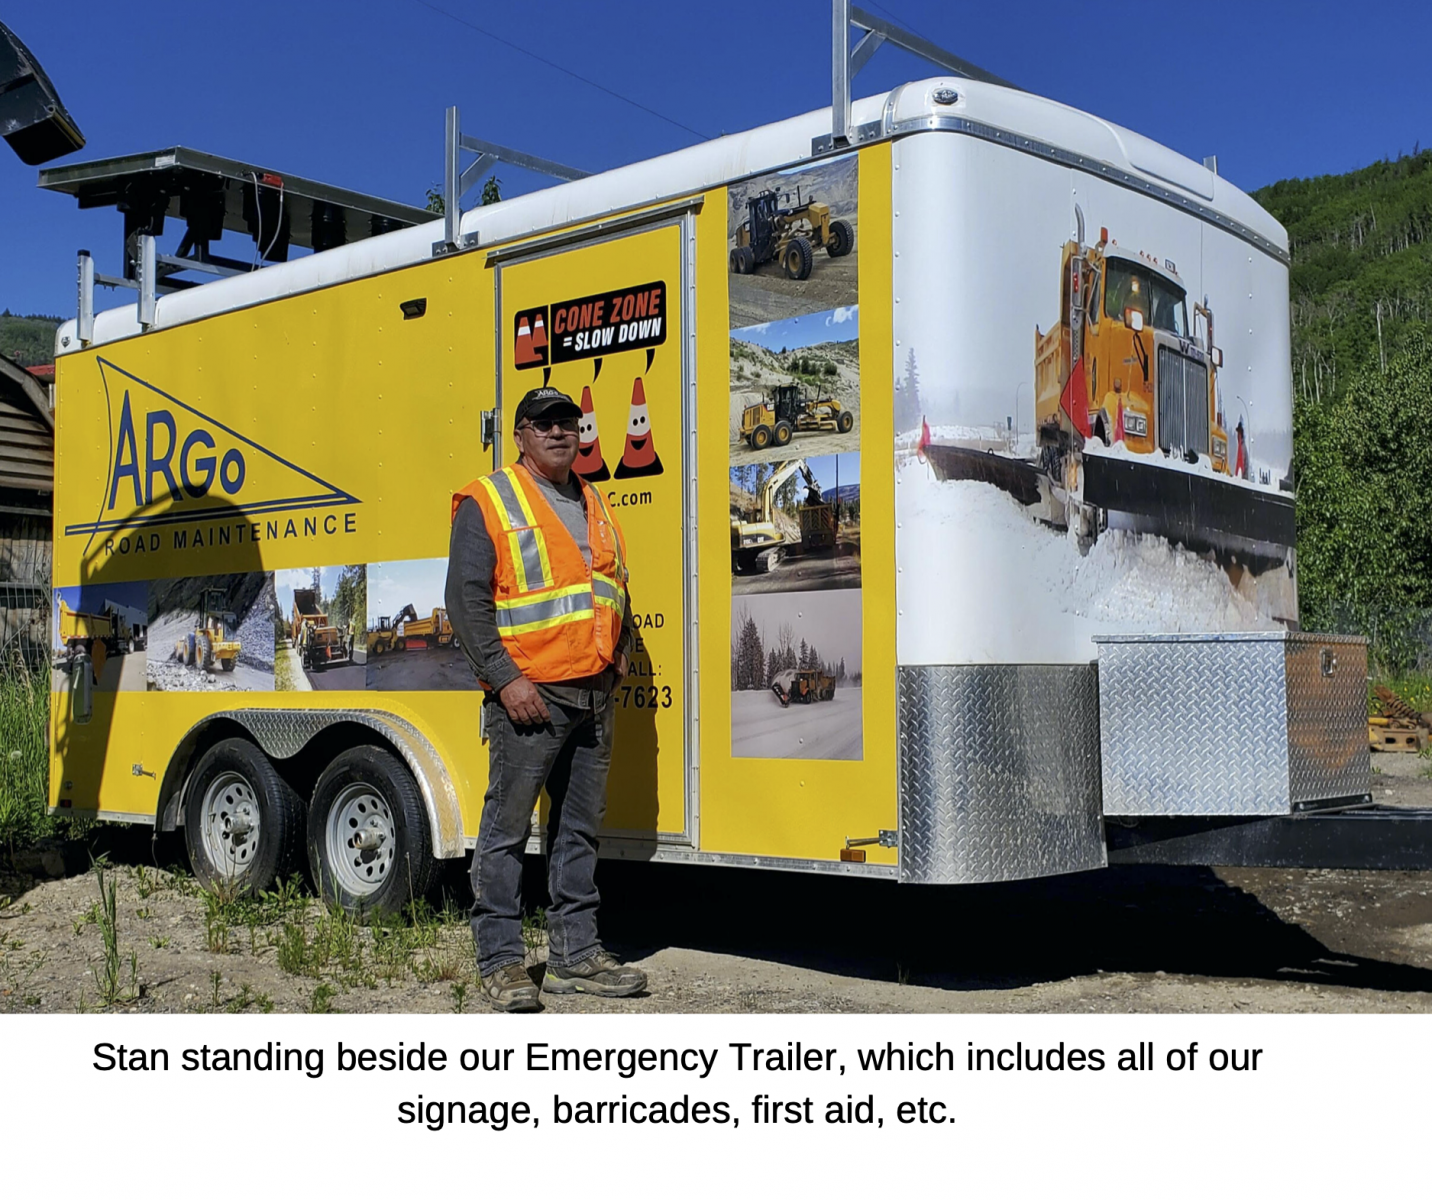 Stan standing beside our Emergency Trailer, which includes all of our signage, barricades, first aid, etc.